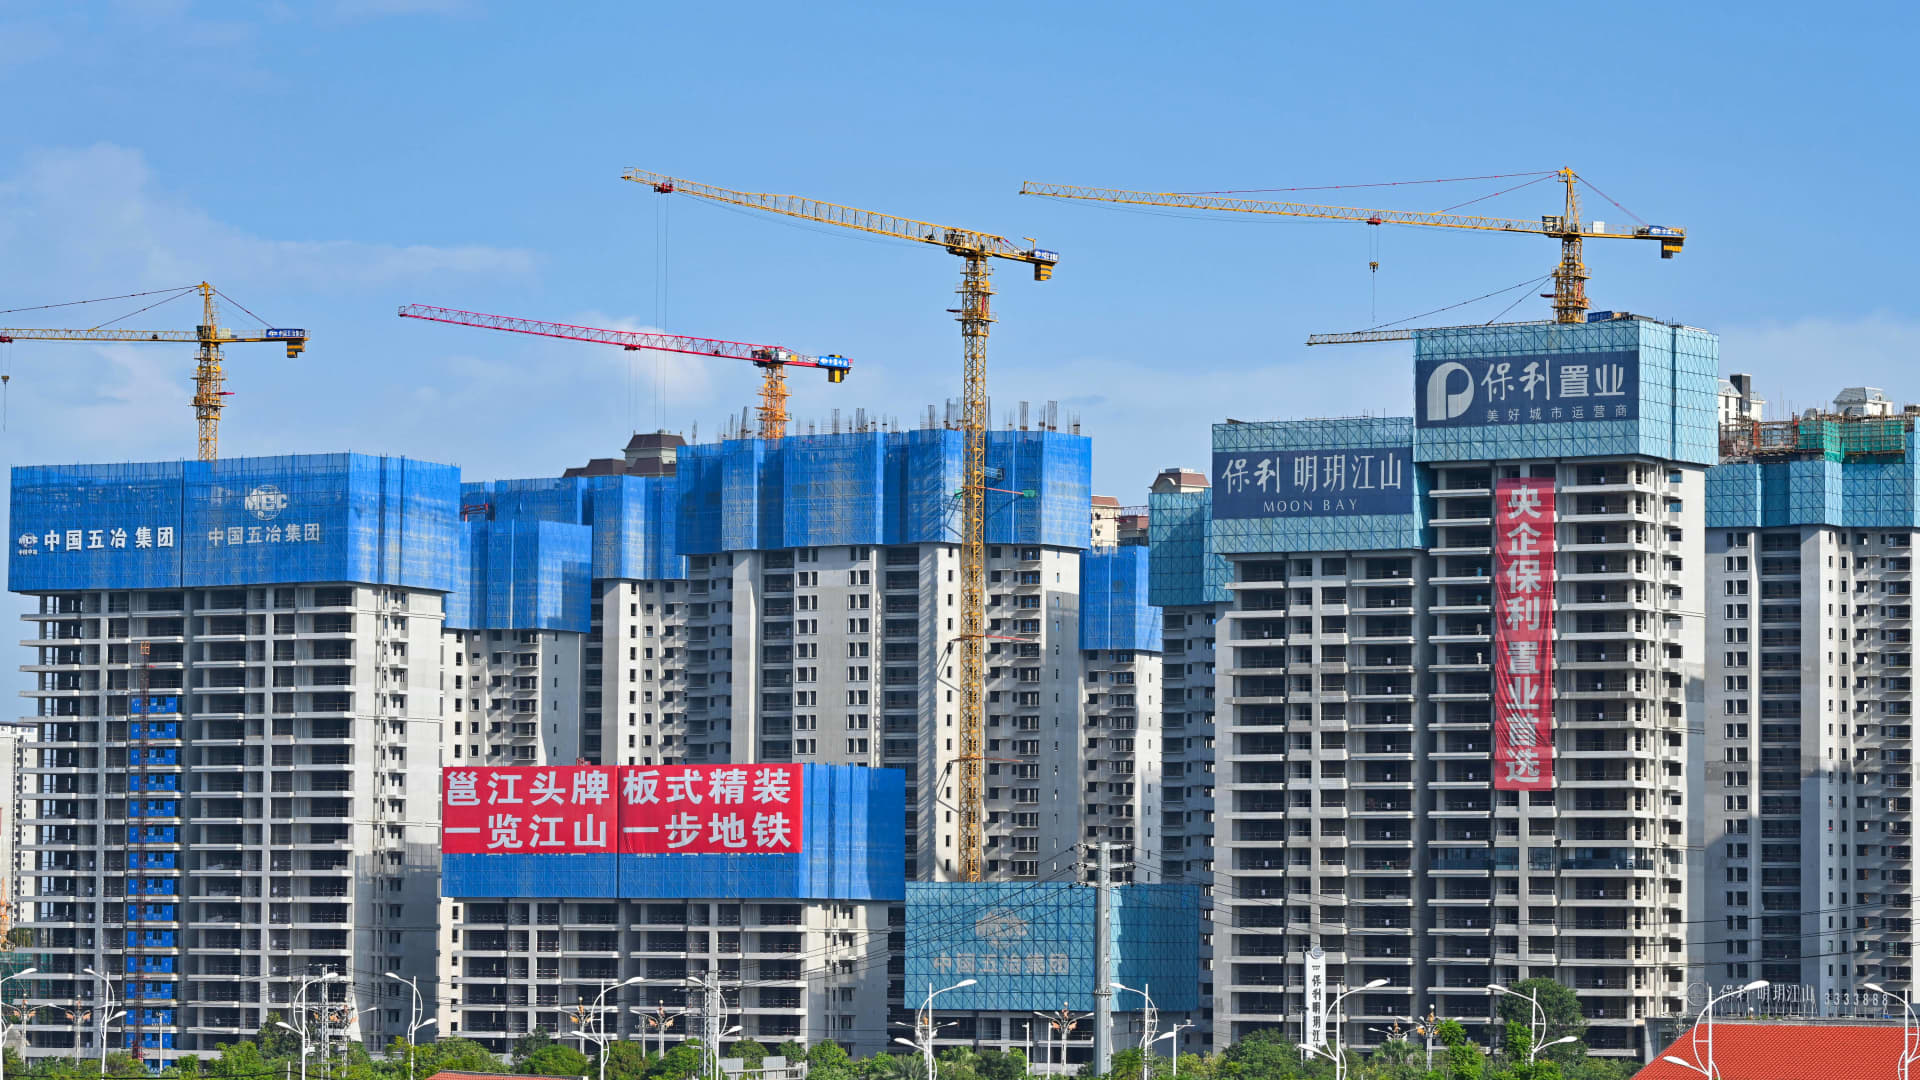 Chinese property developers’ cash flows have plunged by more than 20%